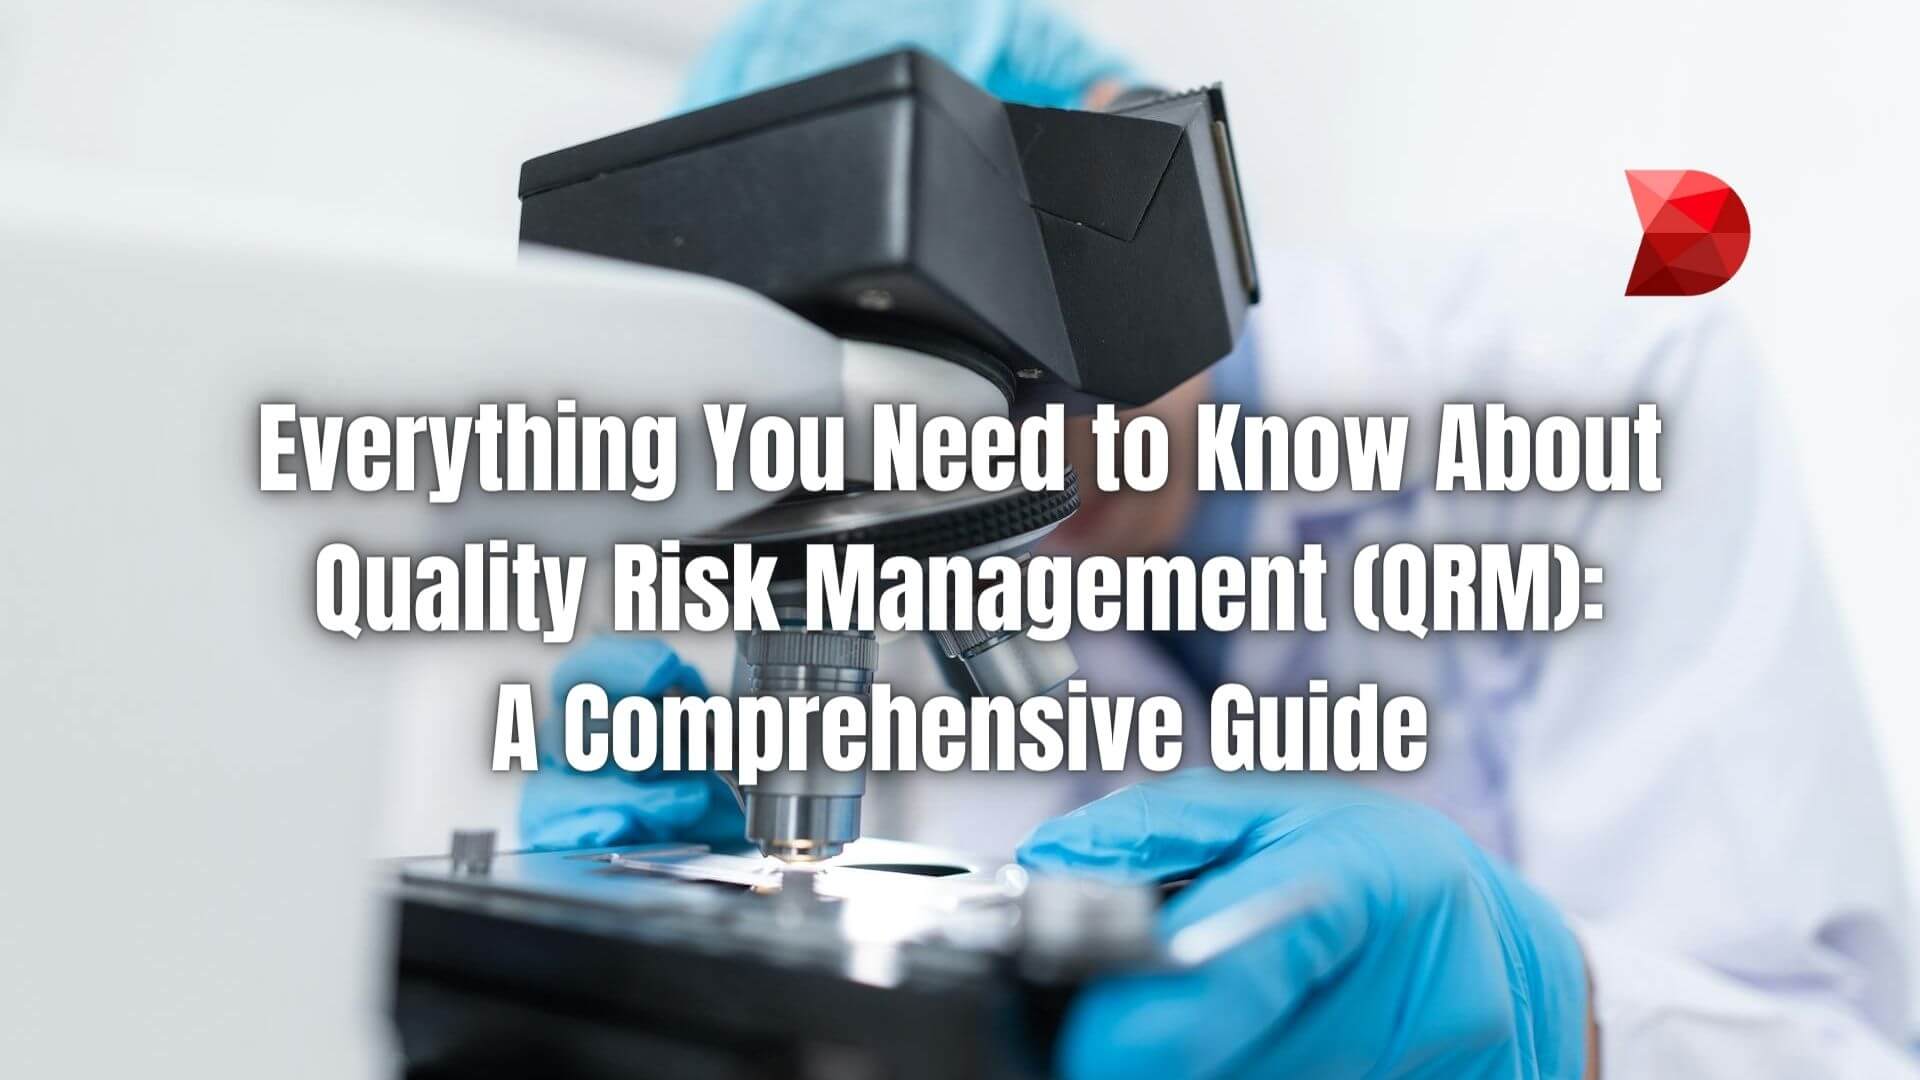 Elevate your quality risk management game with our in-depth guide. Learn how to identify, assess, and mitigate quality risks effectively.